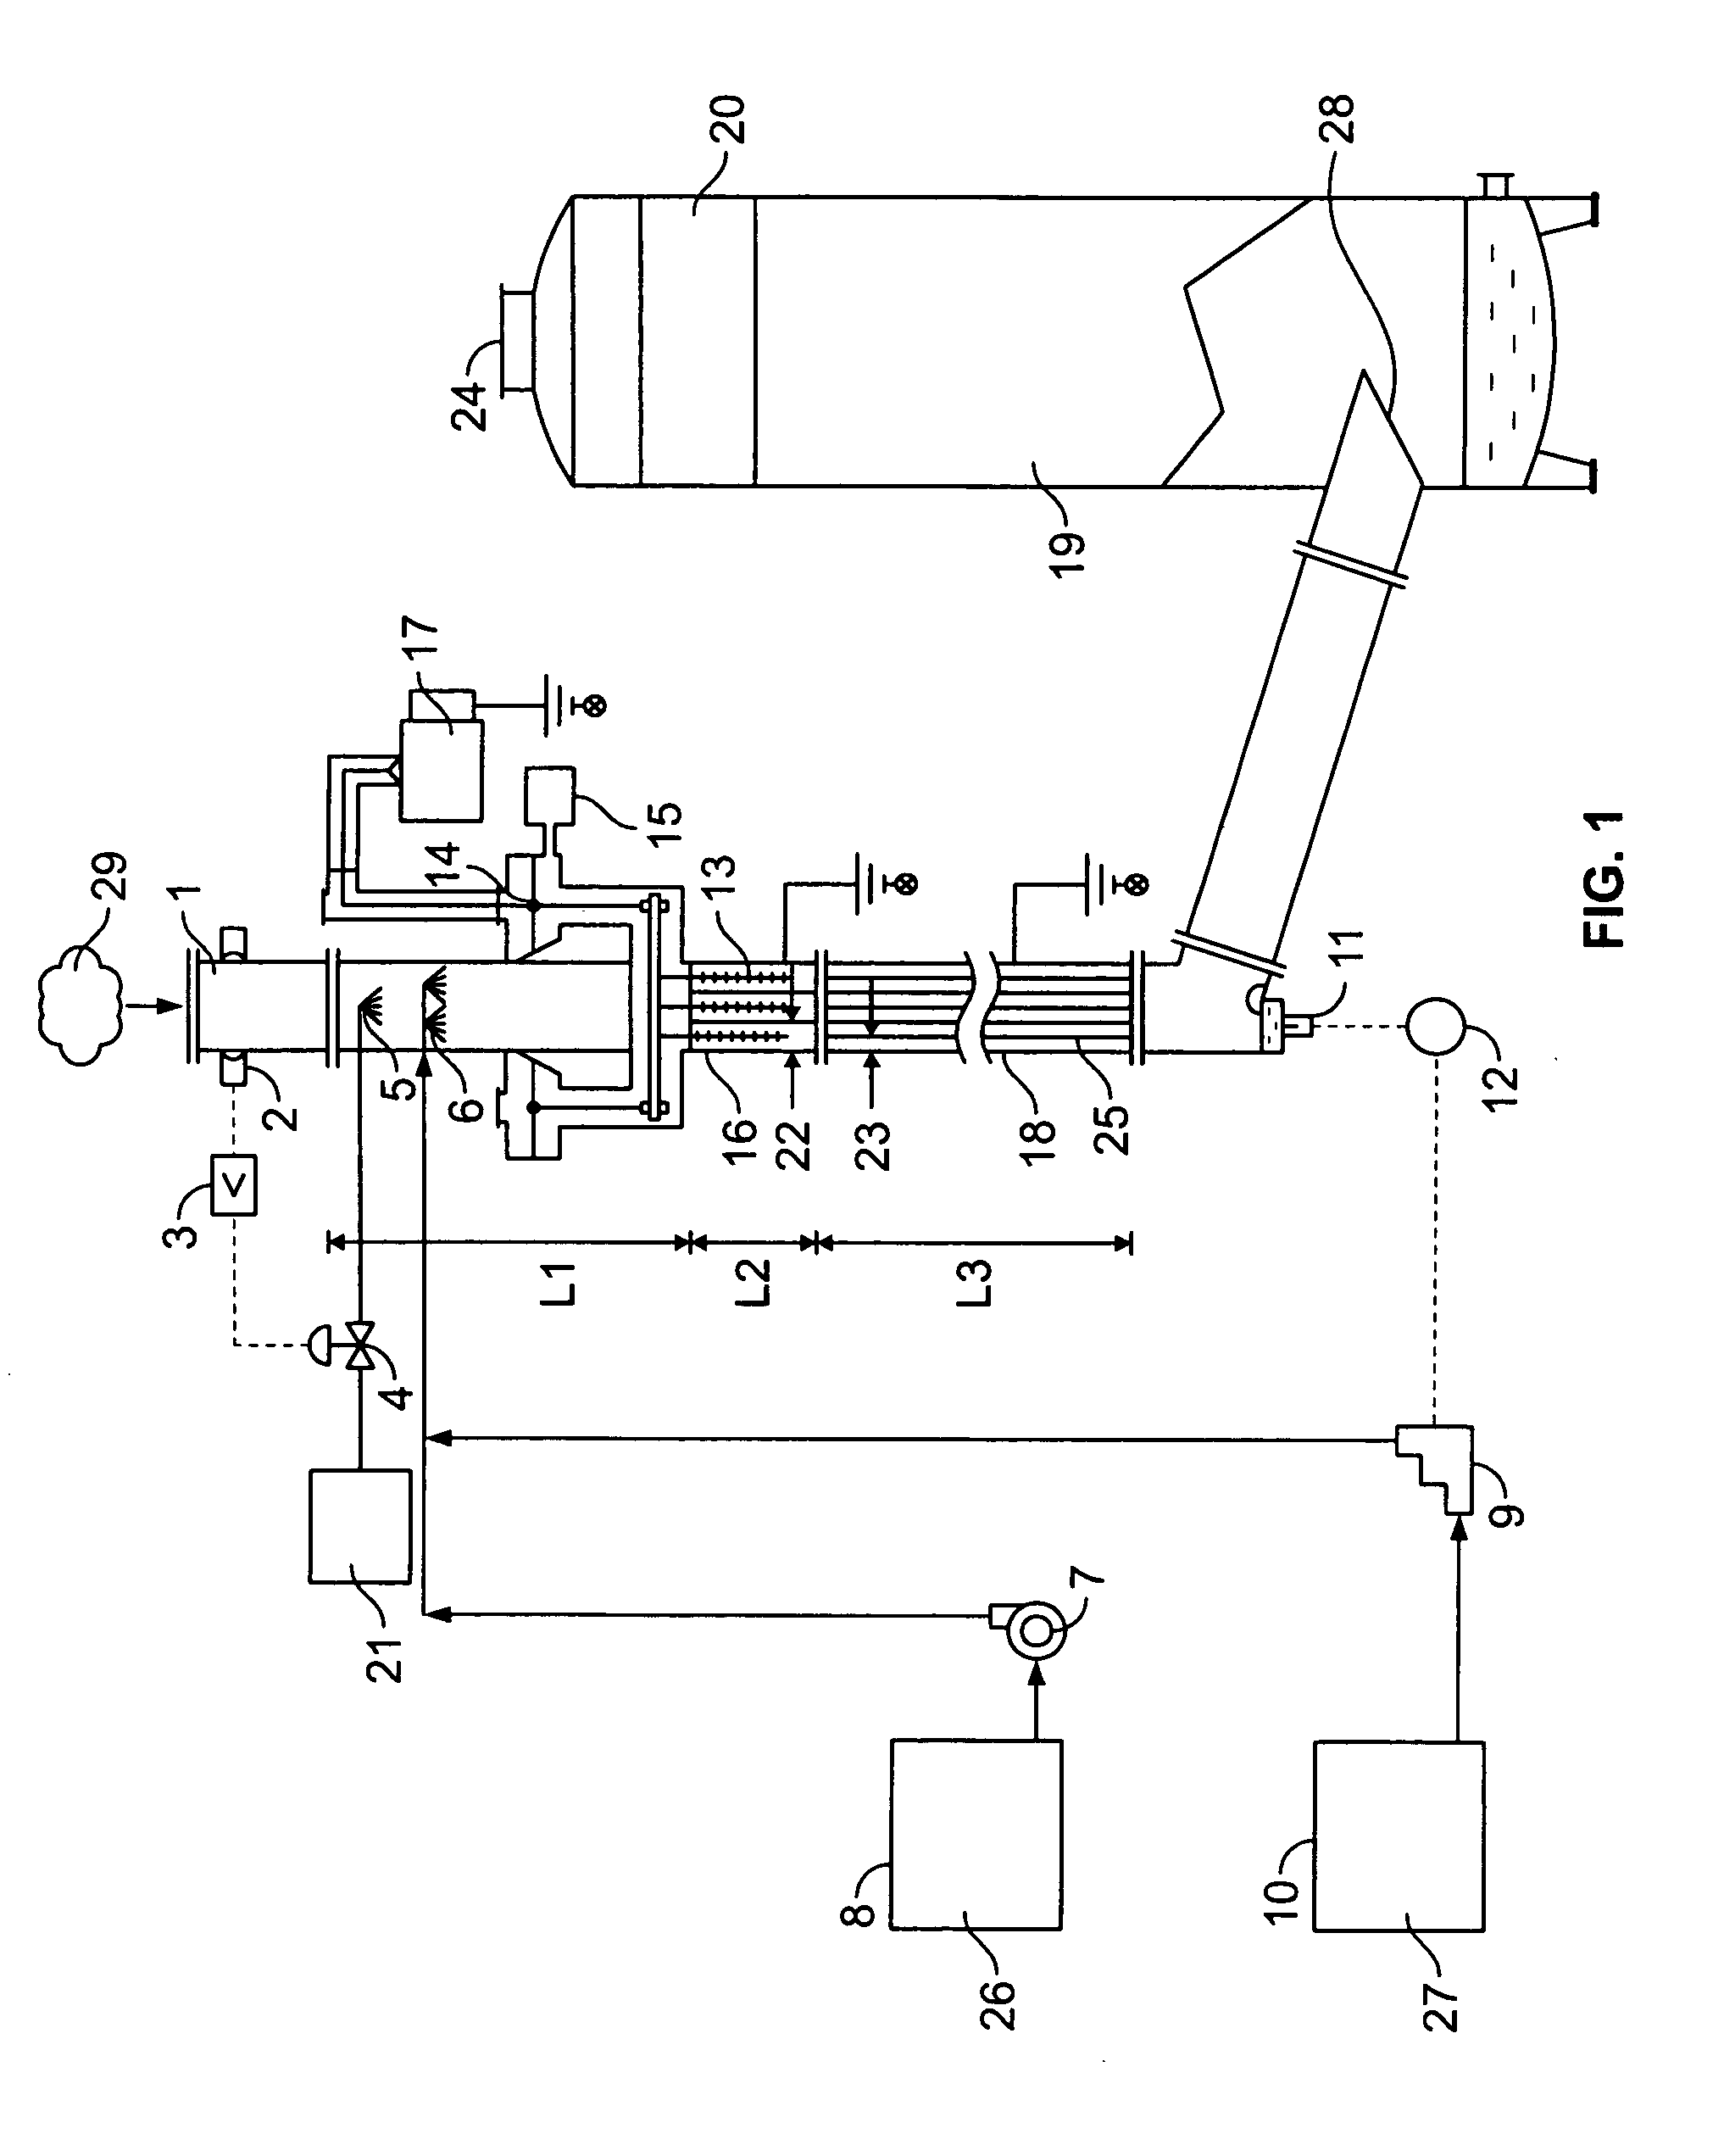 Wet electrostatic liquid film oxidizing reactor apparatus and method for removal of NOx, SOx, mercury, acid droplets, heavy metals and ash particles from a moving gas